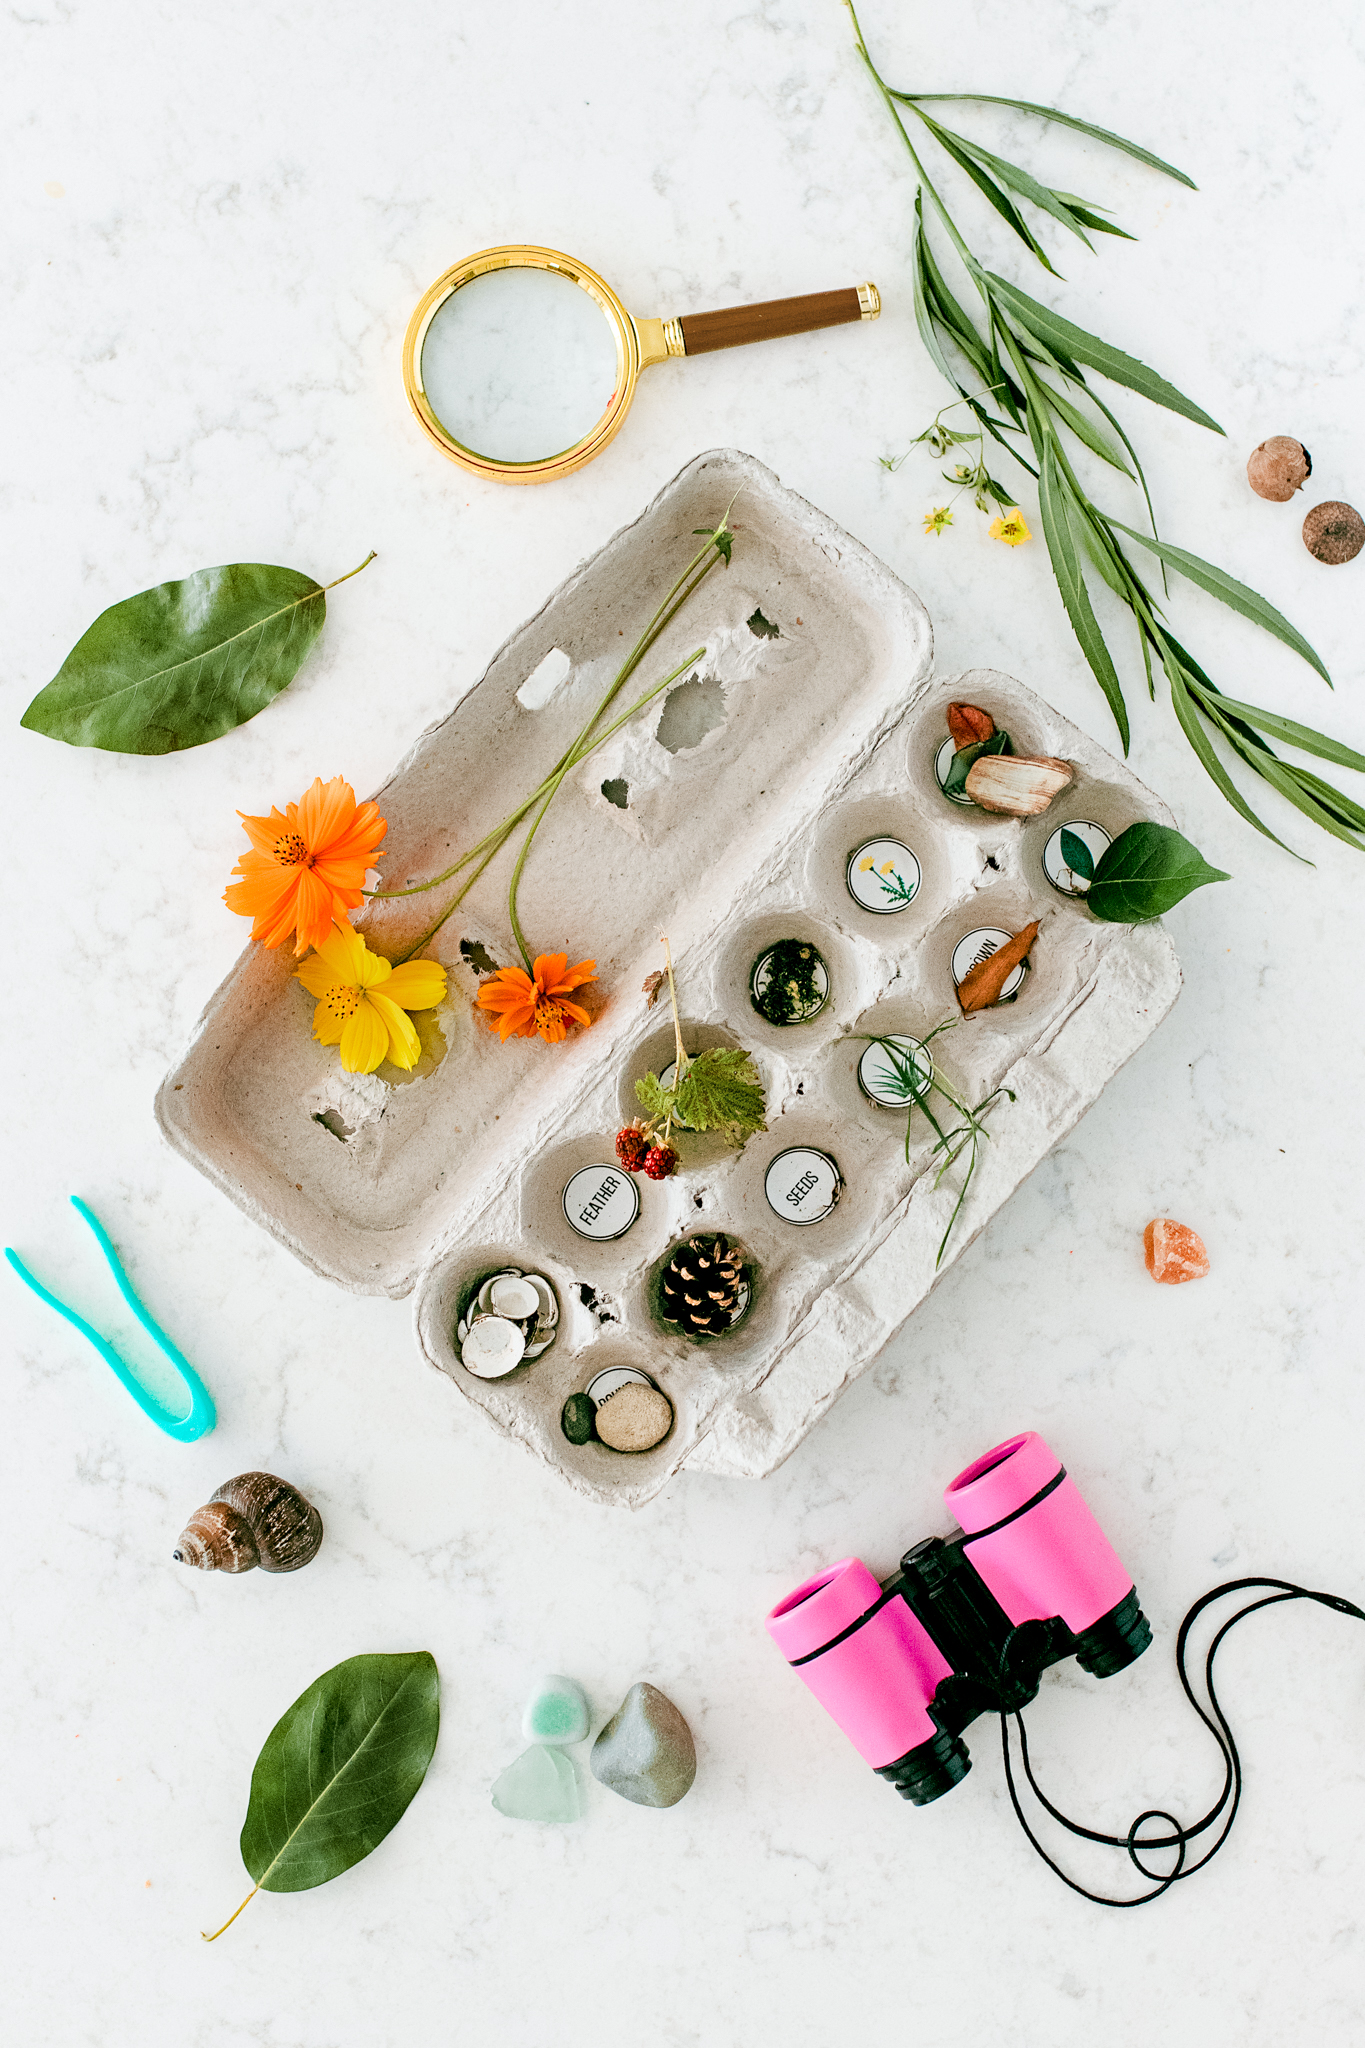 Use an empty egg carton to create a scavenger hunt for a nature walk. Label each spot with the name or drawing of a small nature item that the kids can look for along the way and add to their carton.